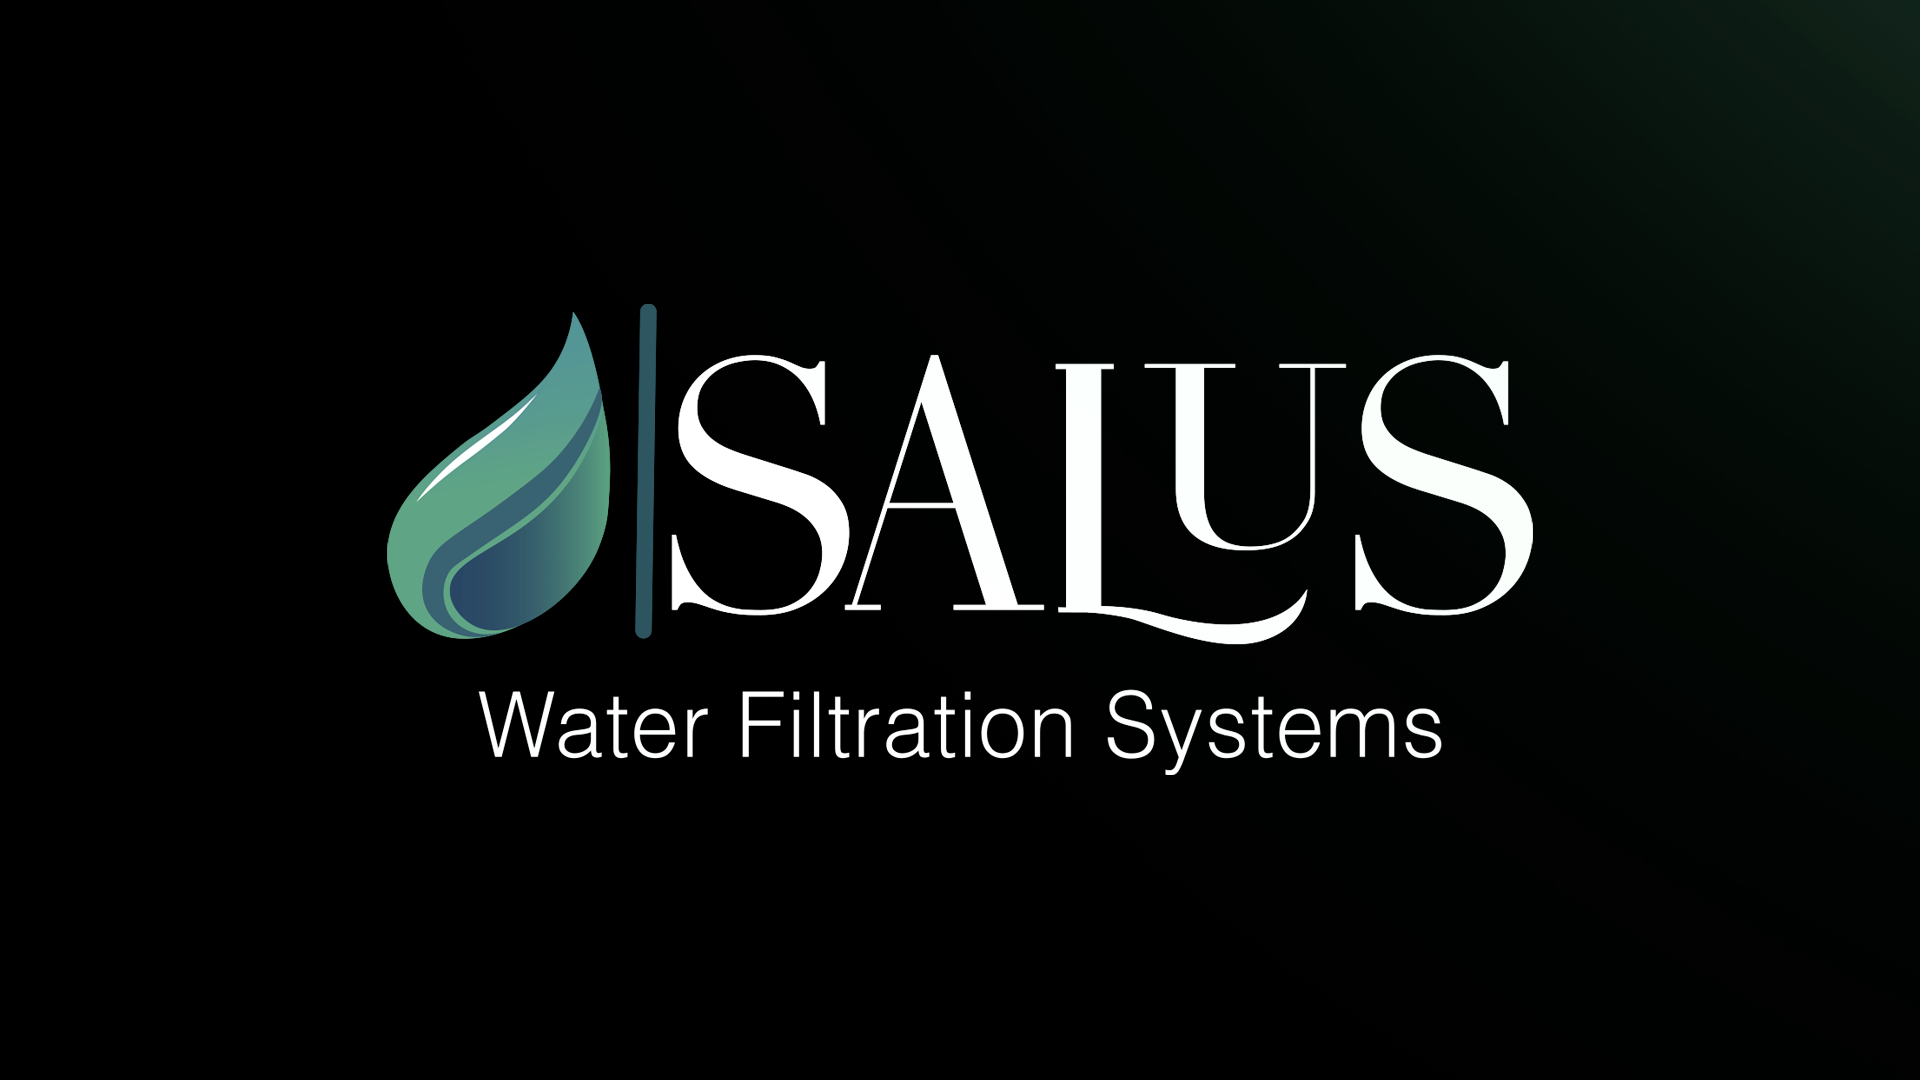 Salus Water is a company specialized in residential water filtration and purification systems. With a strong presence in the market, we are recognized for offering cutting-edge technology and providing a comprehensive solution to ensure the quality of the water you and your family consume daily.